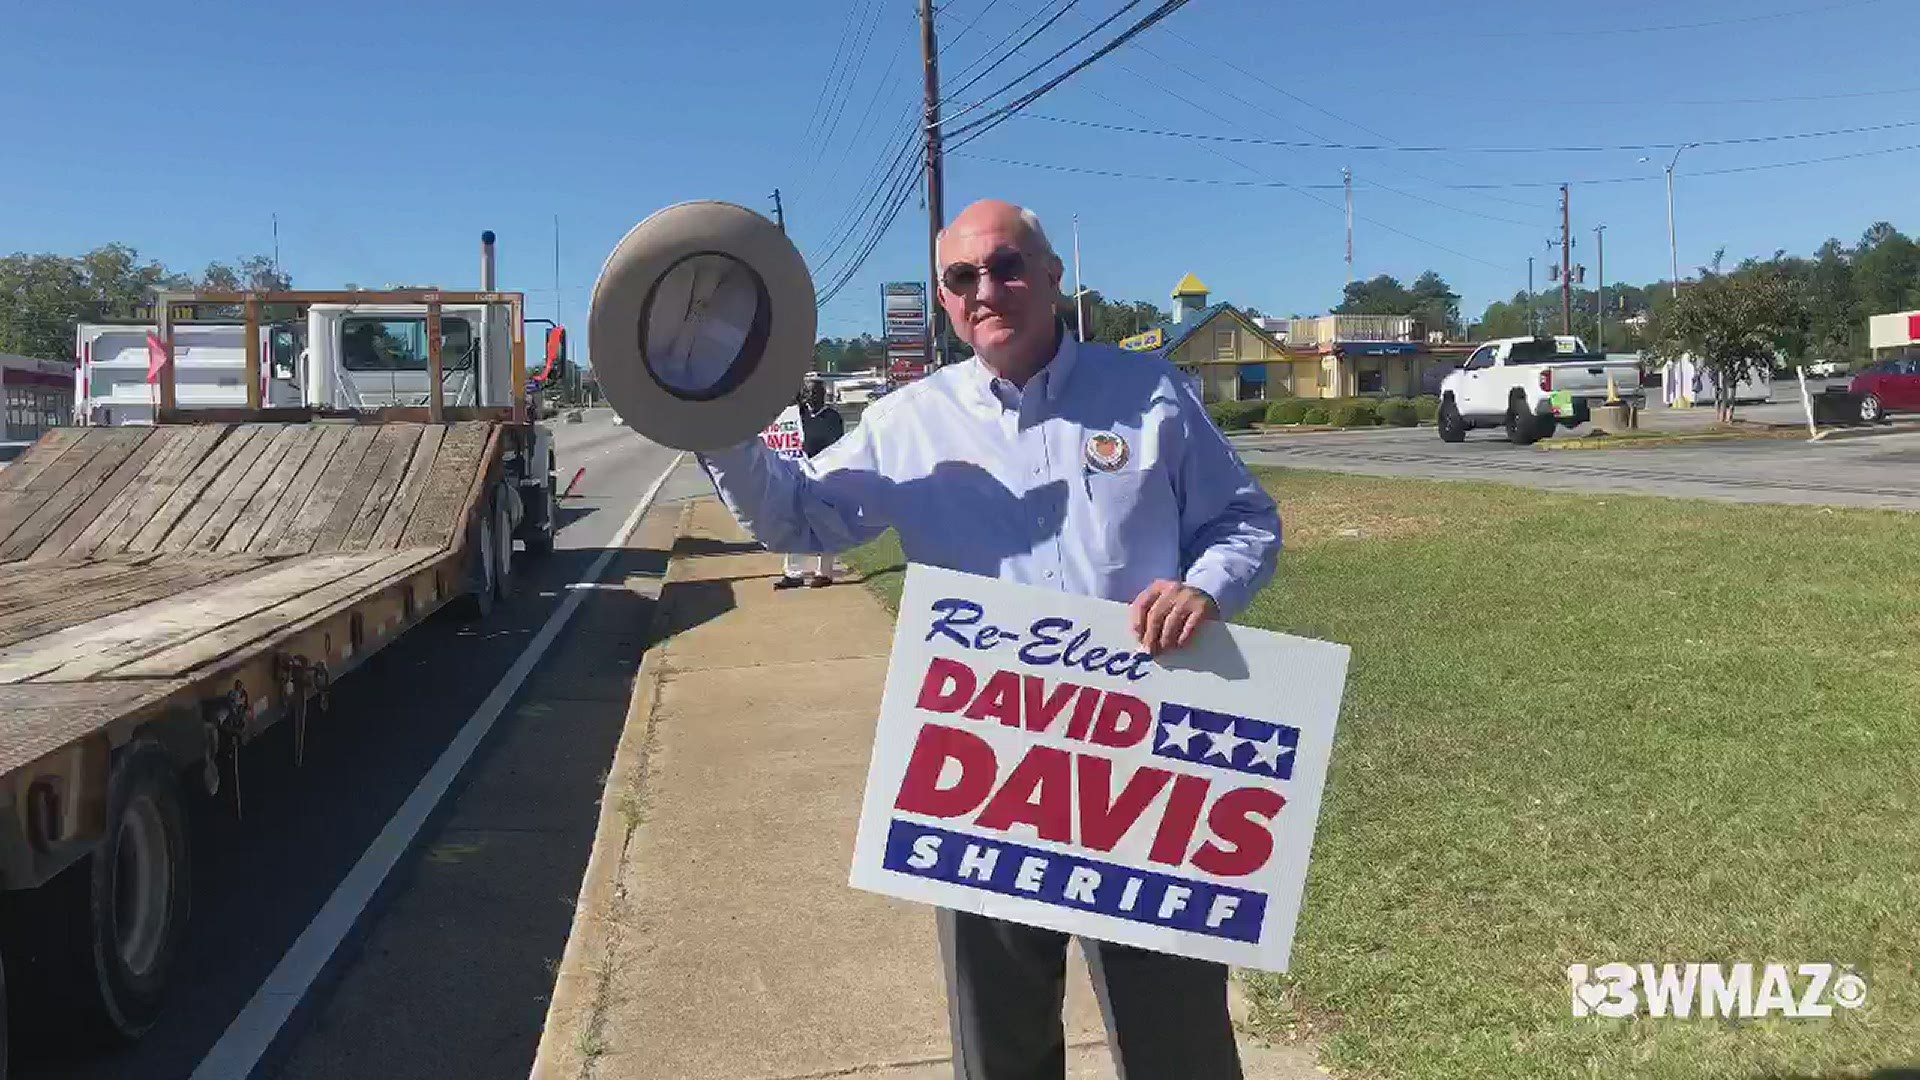 Sheriff Davis Davis was out waving at voters Tuesday as he seeks a third term in office. He faces a challenge this year from veteran GBI agent JT Ricketson.